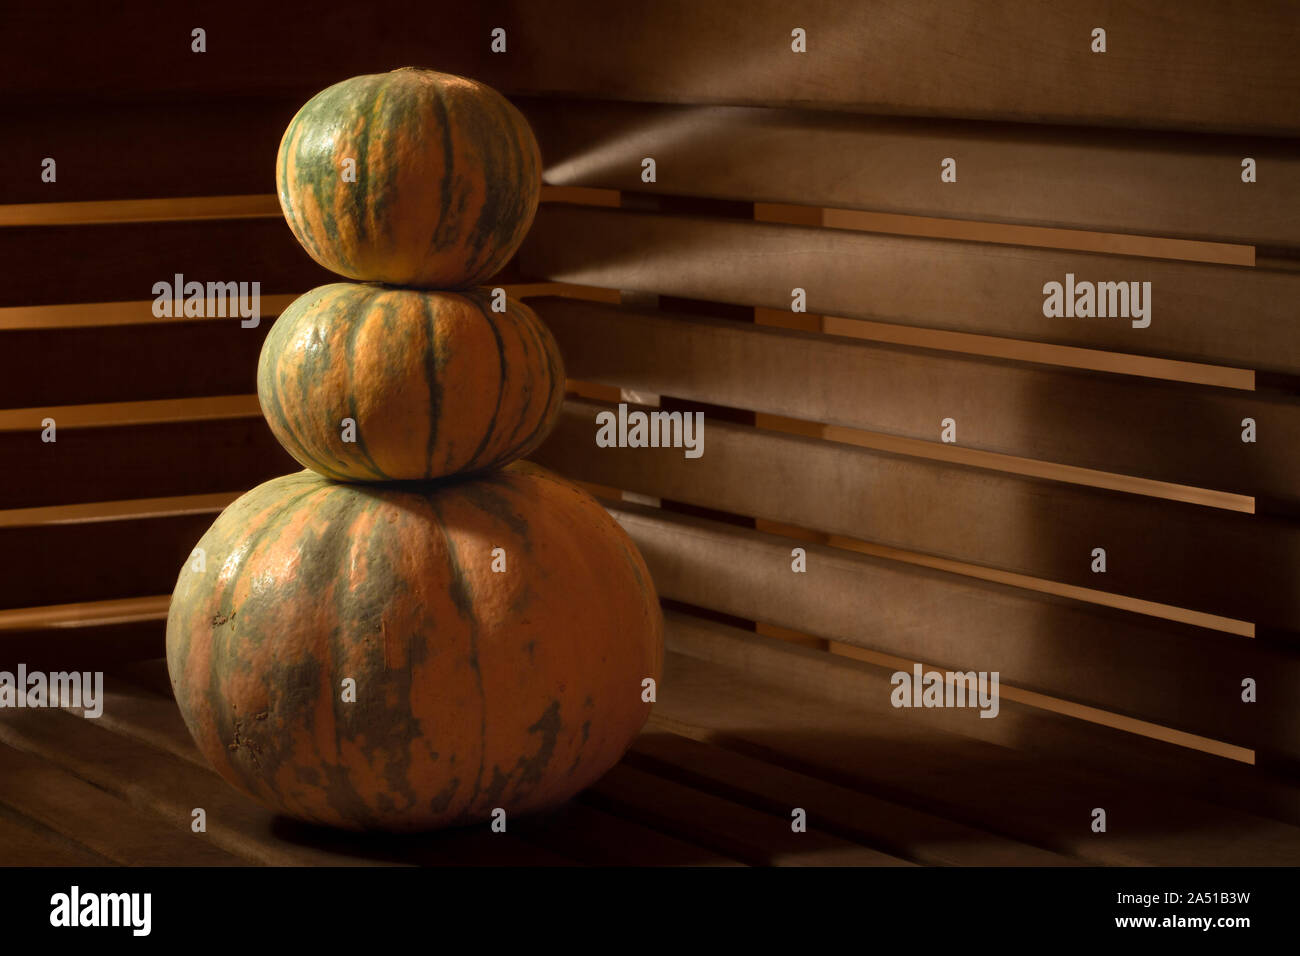 A pyramid of three pumpkins on a wooden surface against the background of walls of wooden slats through which light breaks through with beautiful rays Stock Photo